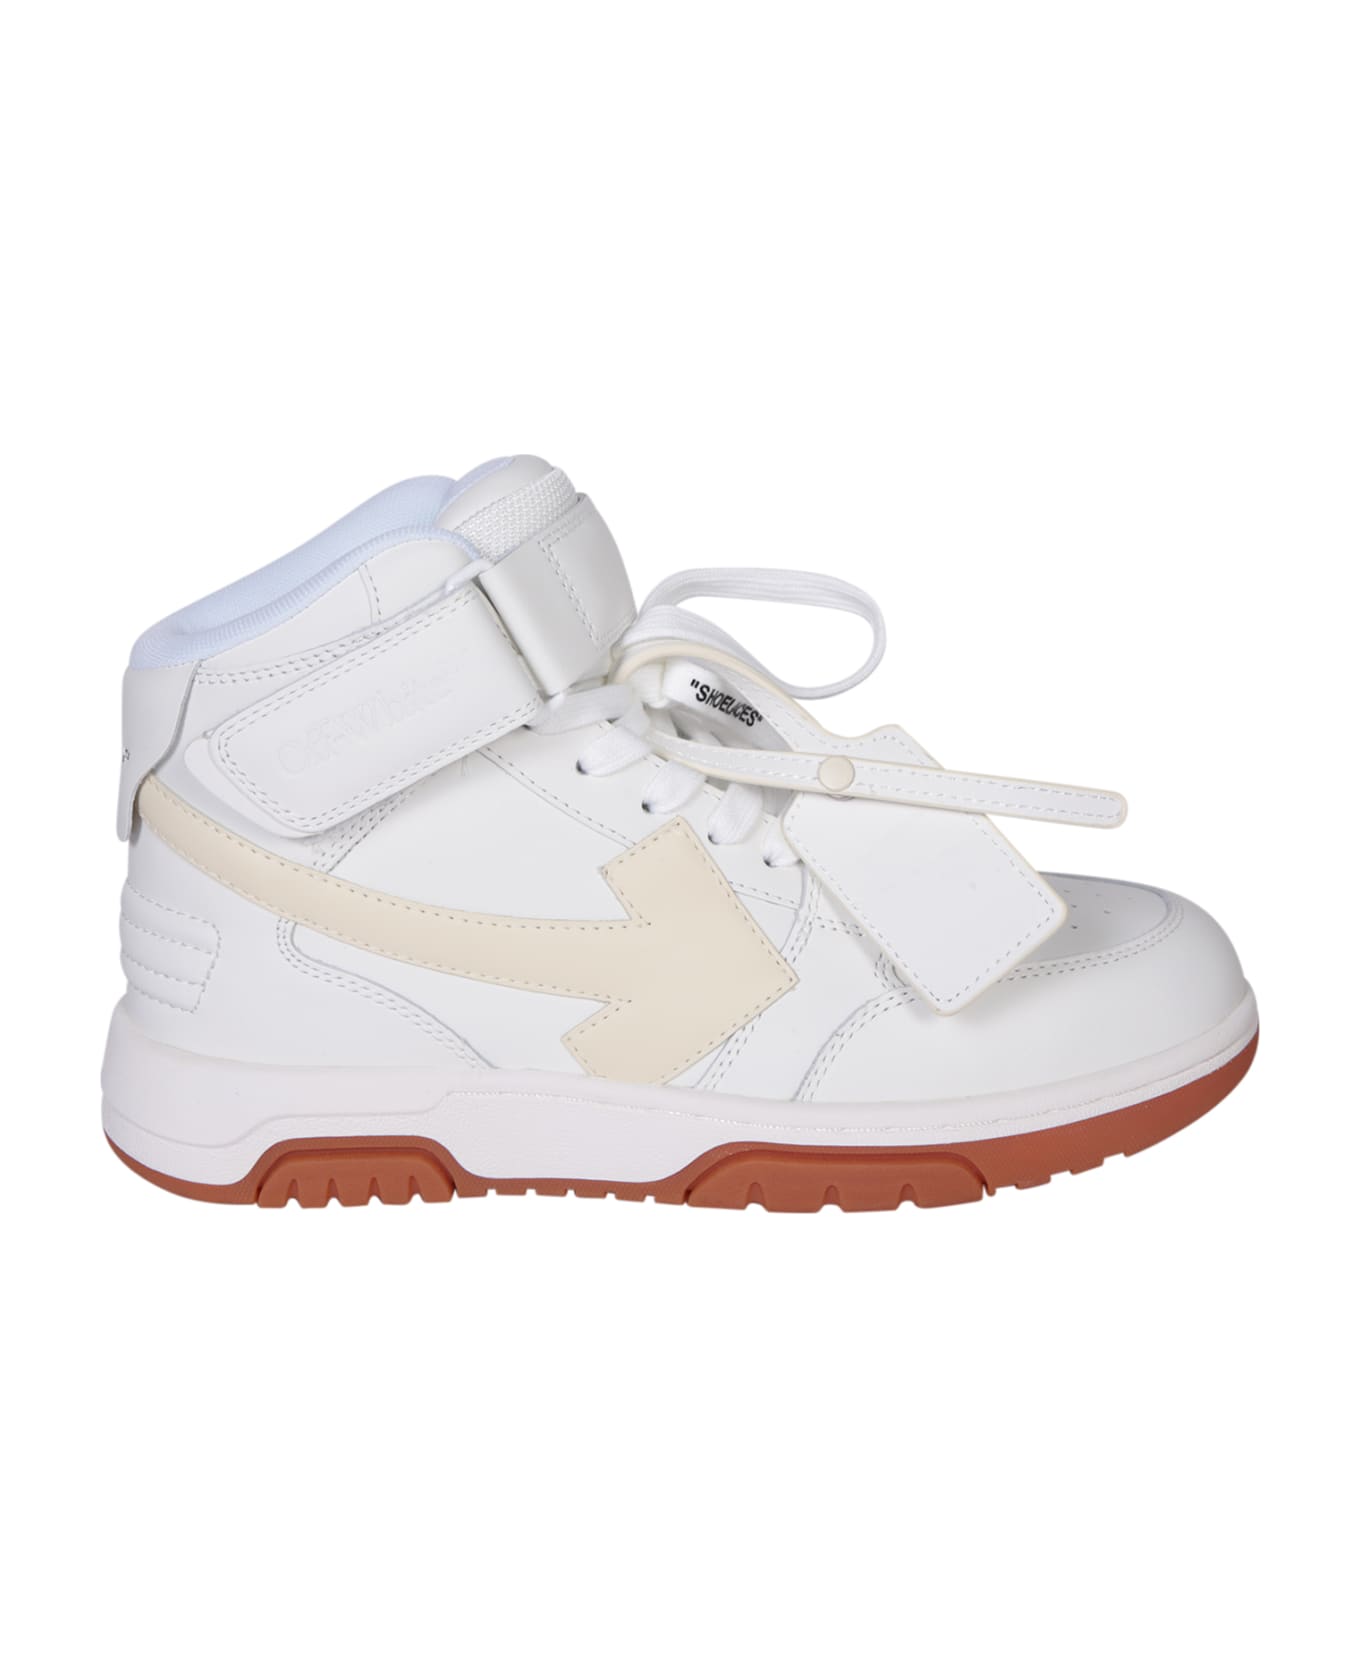 Off-White Lace-up Sneakers - White